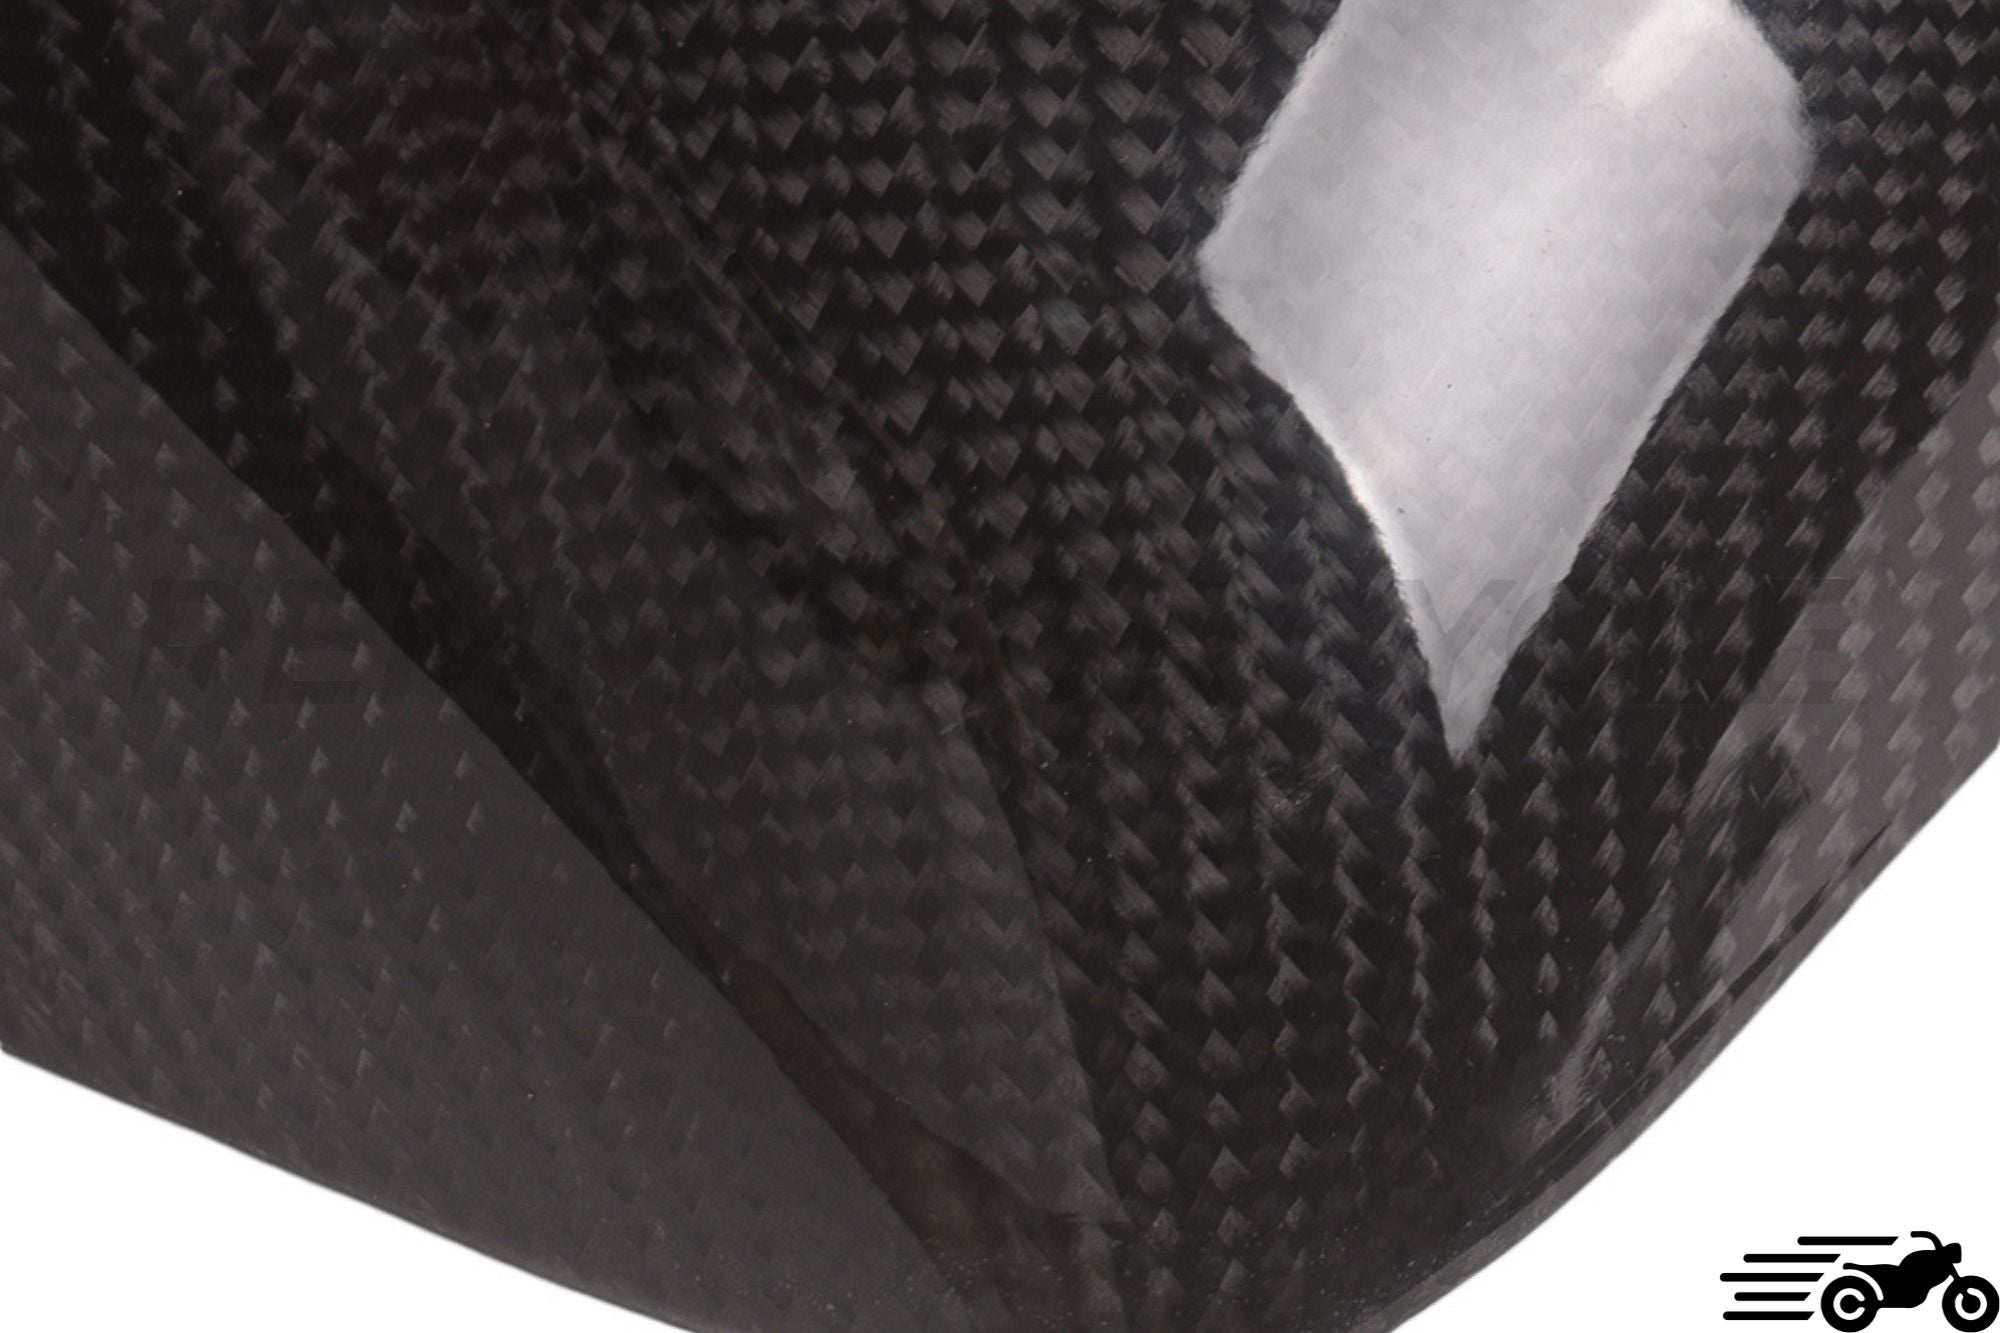 BMW R Series Carbon Engine Cover